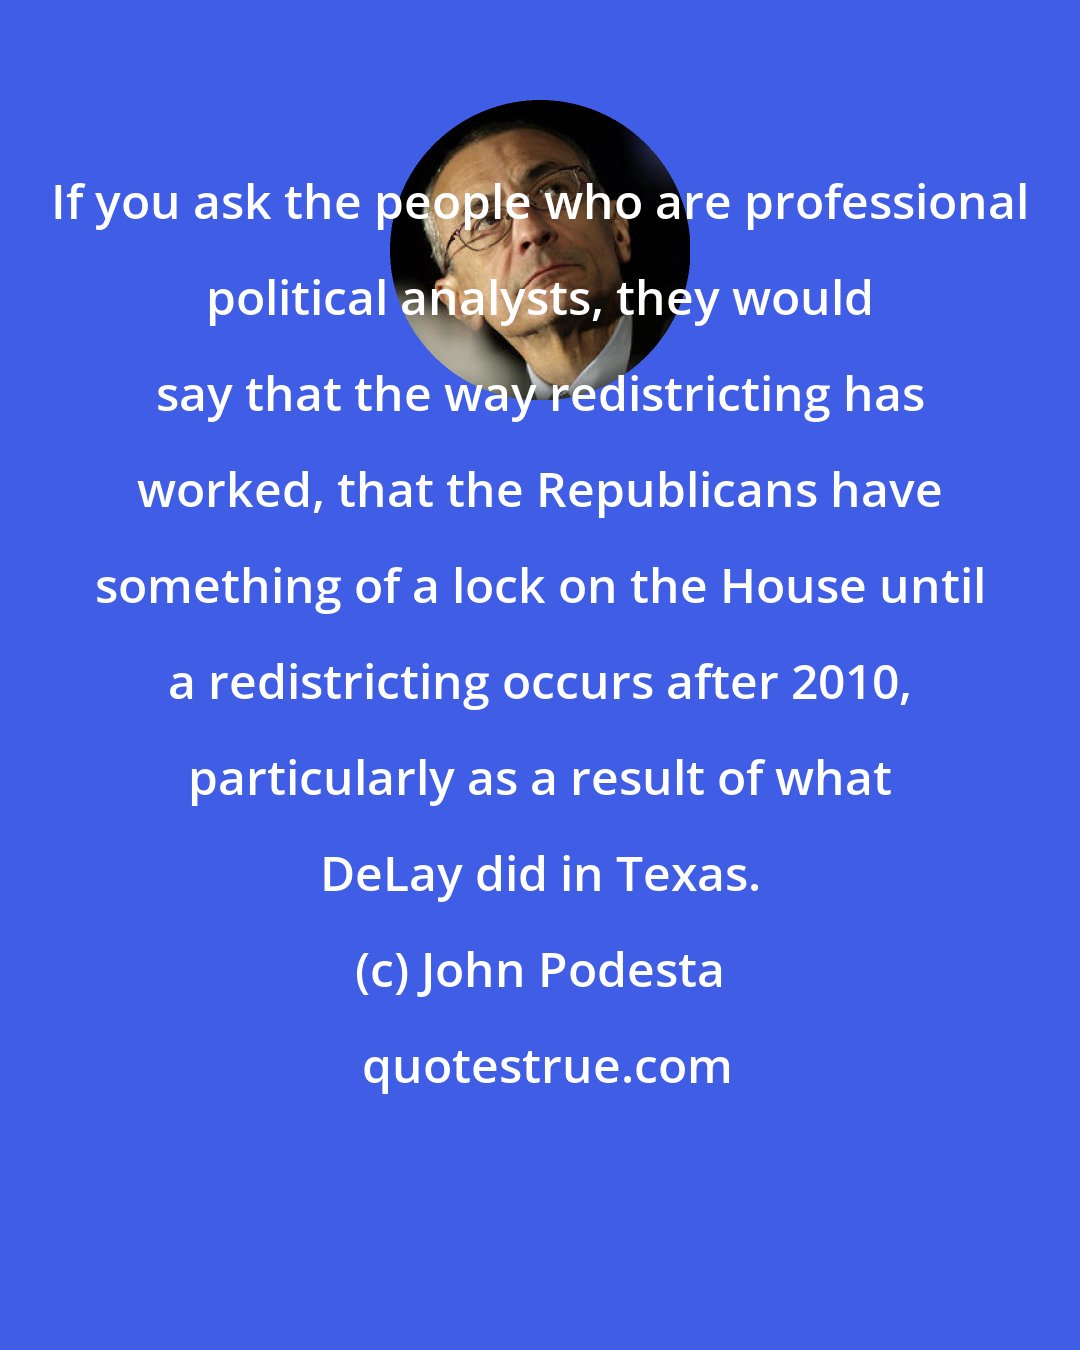 John Podesta: If you ask the people who are professional political analysts, they would say that the way redistricting has worked, that the Republicans have something of a lock on the House until a redistricting occurs after 2010, particularly as a result of what DeLay did in Texas.